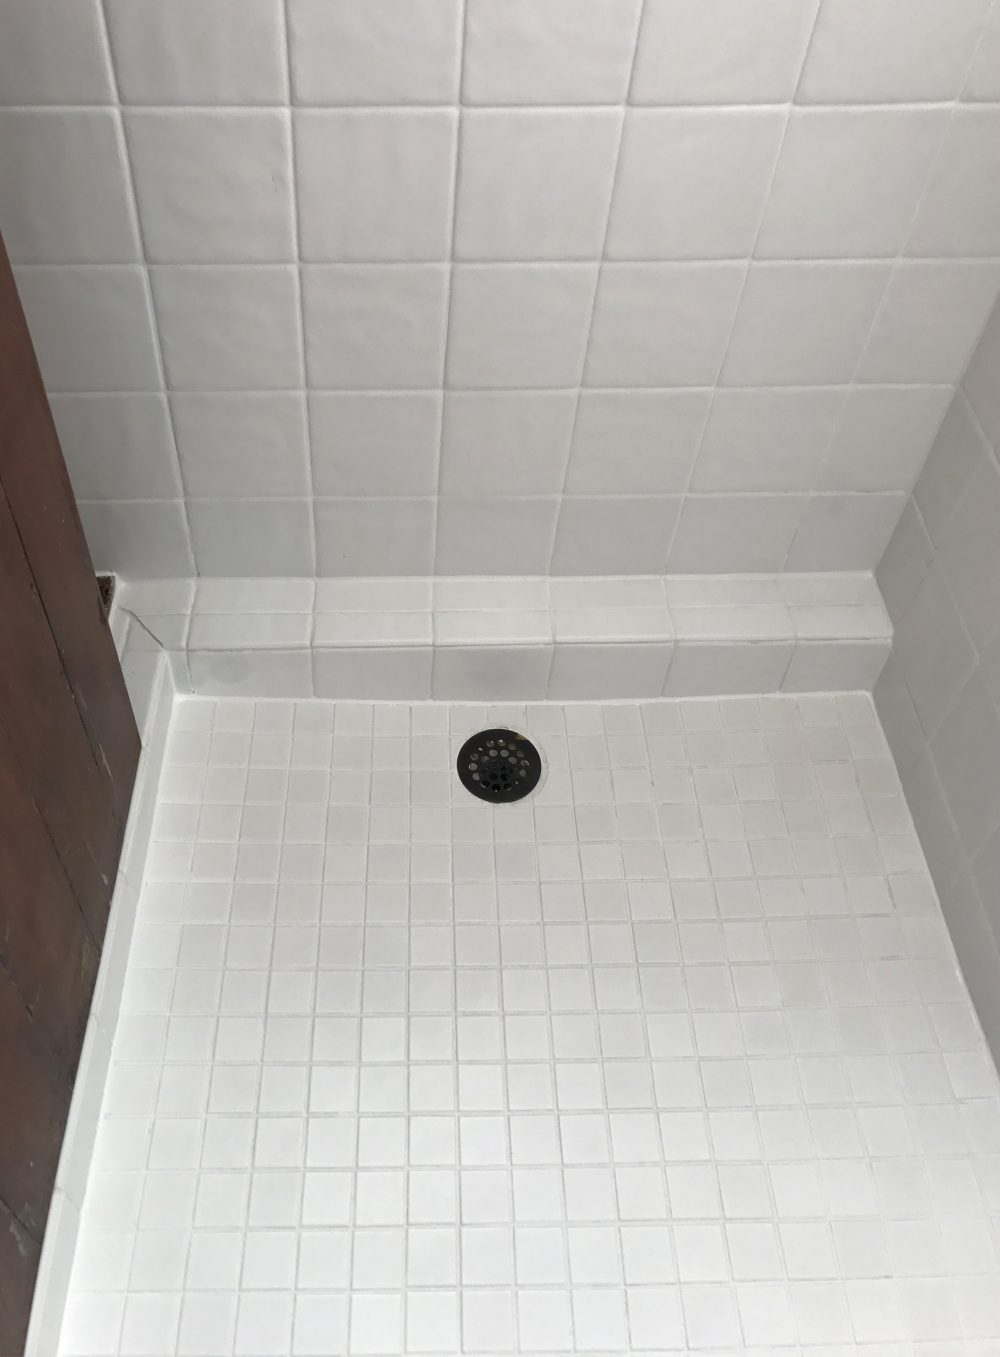 Shower Tile Re-Grouting